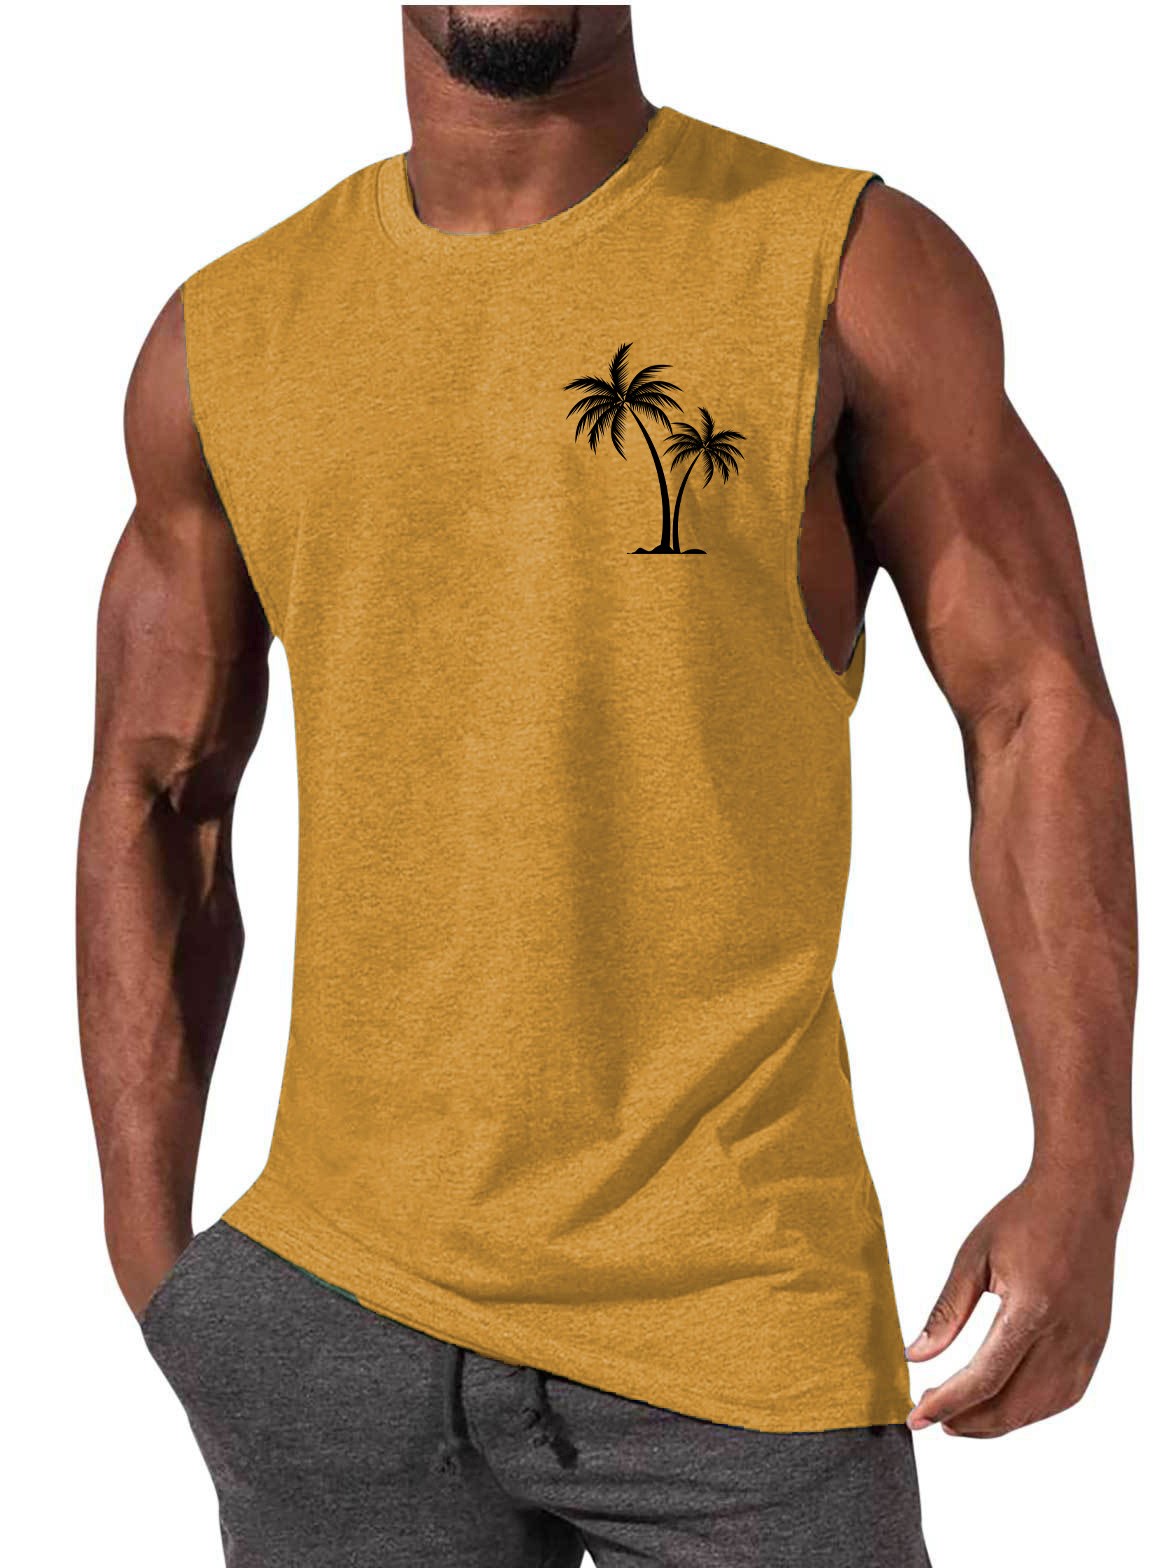 Men Coconut Tree Embroidery Vest Workout Muscle Tank Top